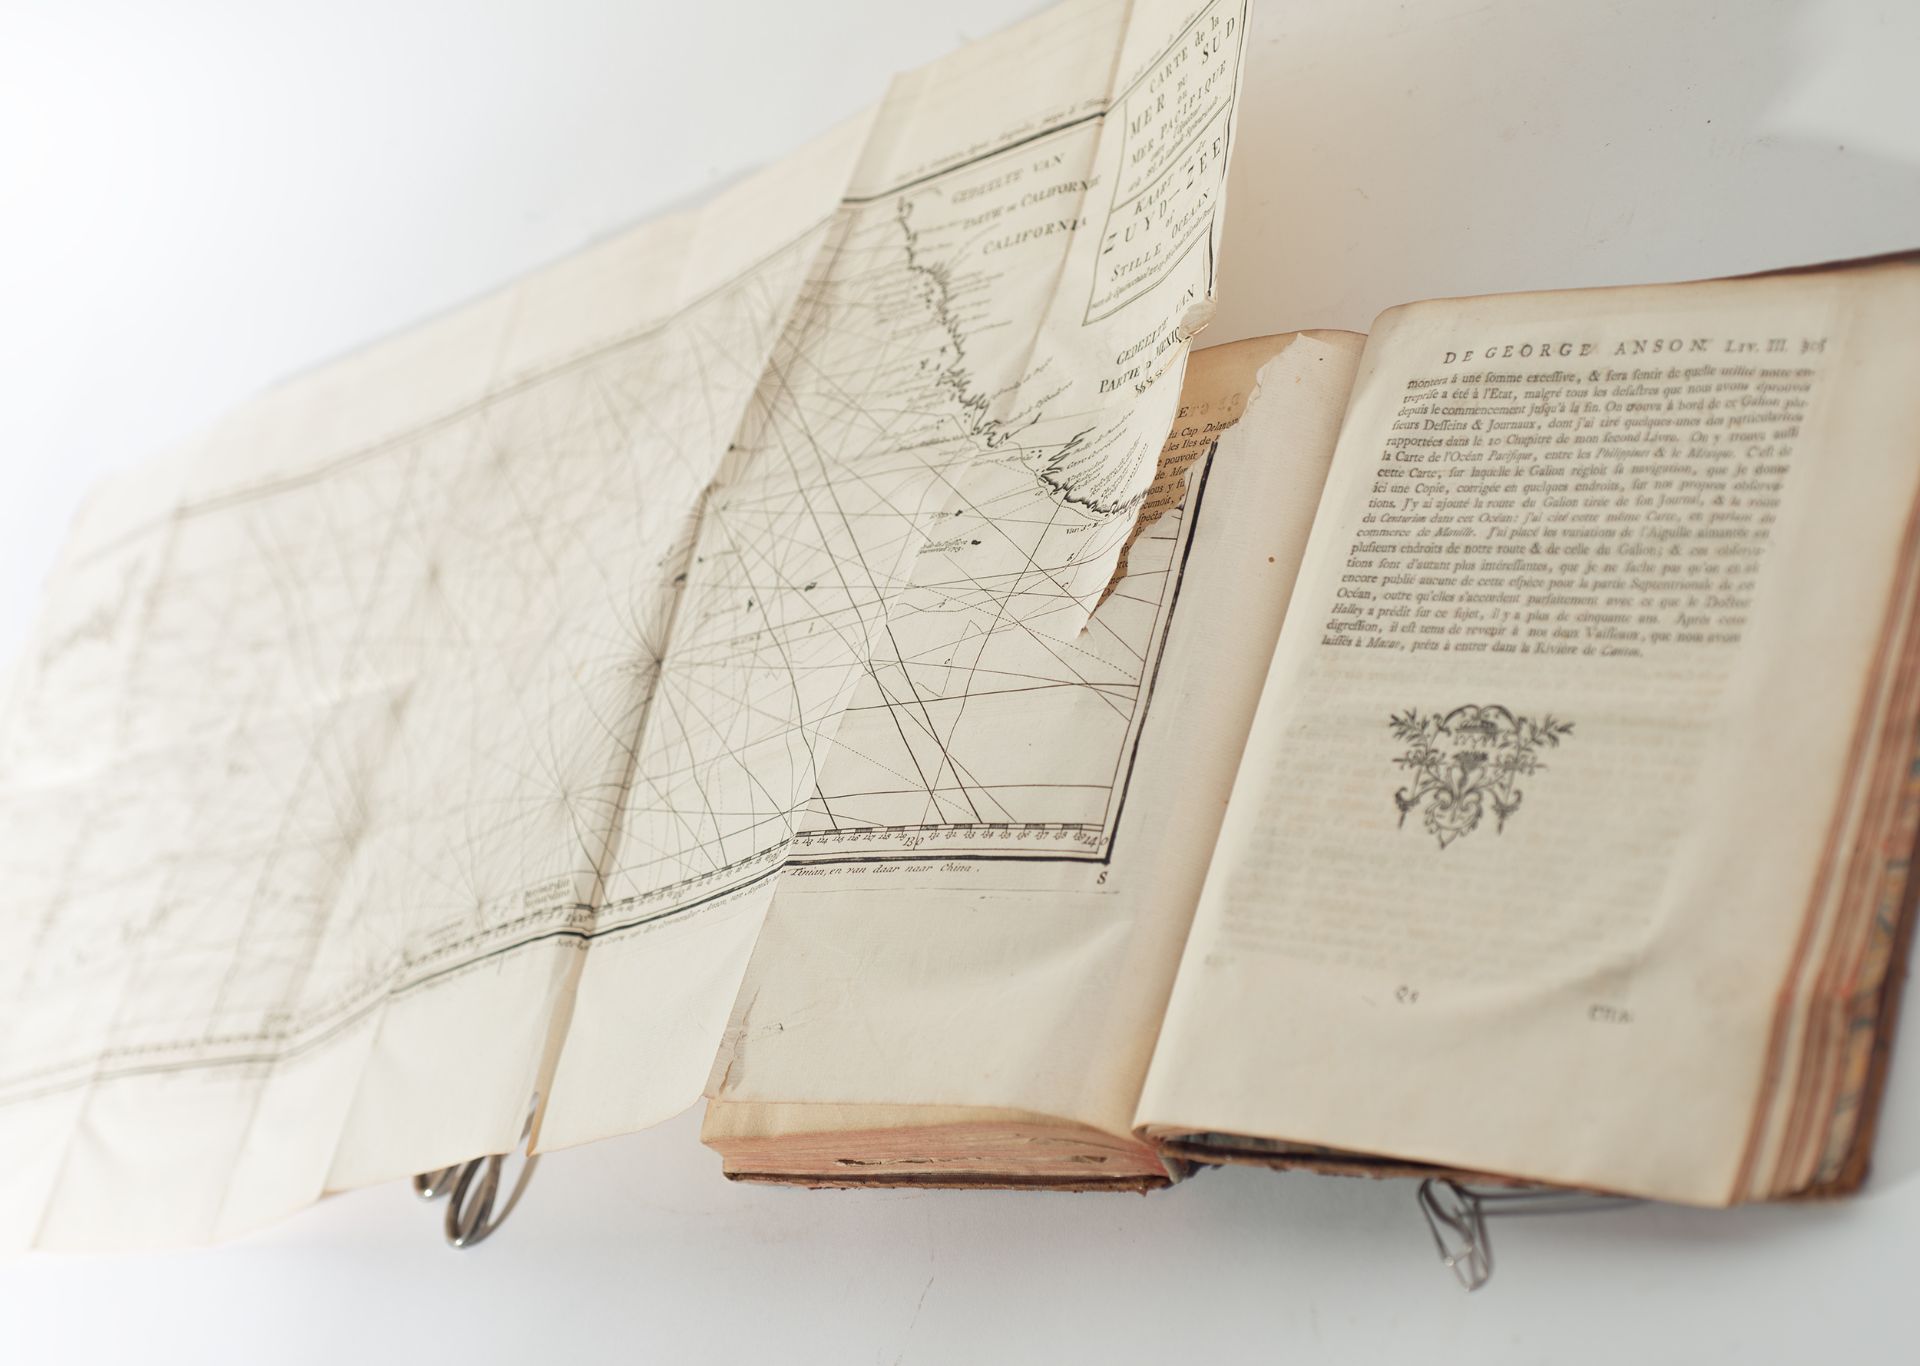 Lord Anson's Voyage Around the World, translated from English, edited 1749 - Image 11 of 12